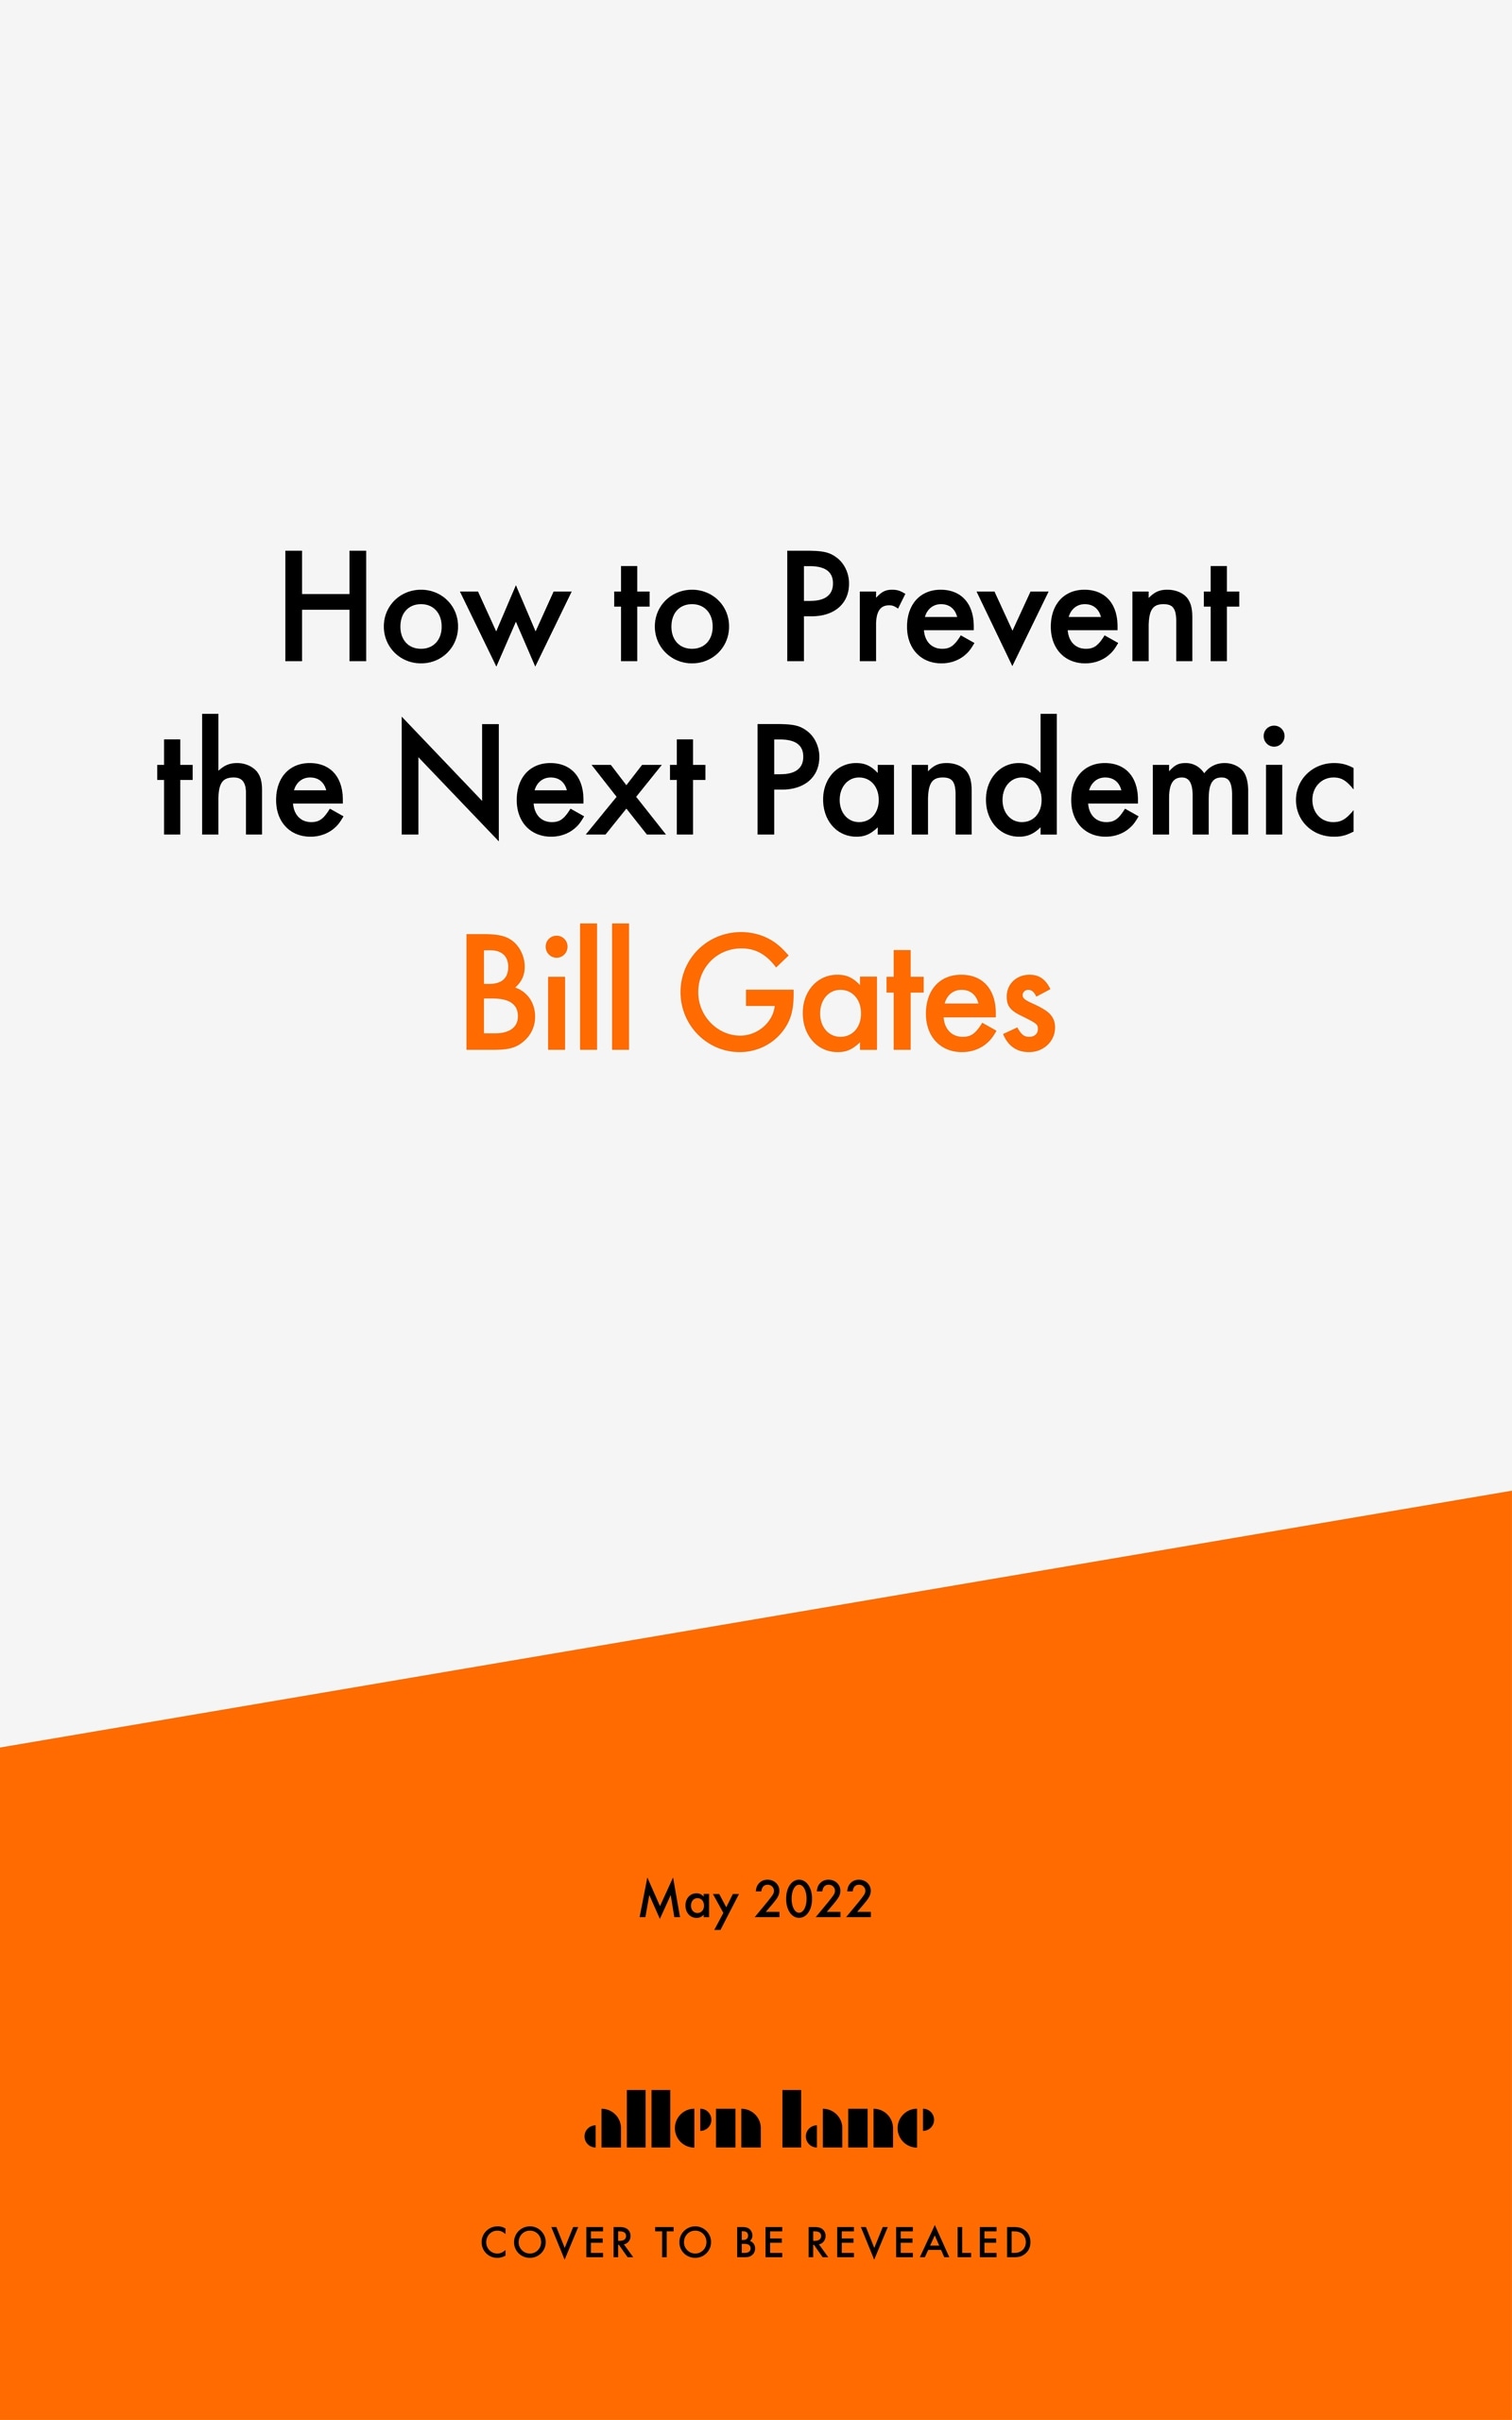 Book “How To Prevent the Next Pandemic” by Bill Gates — May 3, 2022